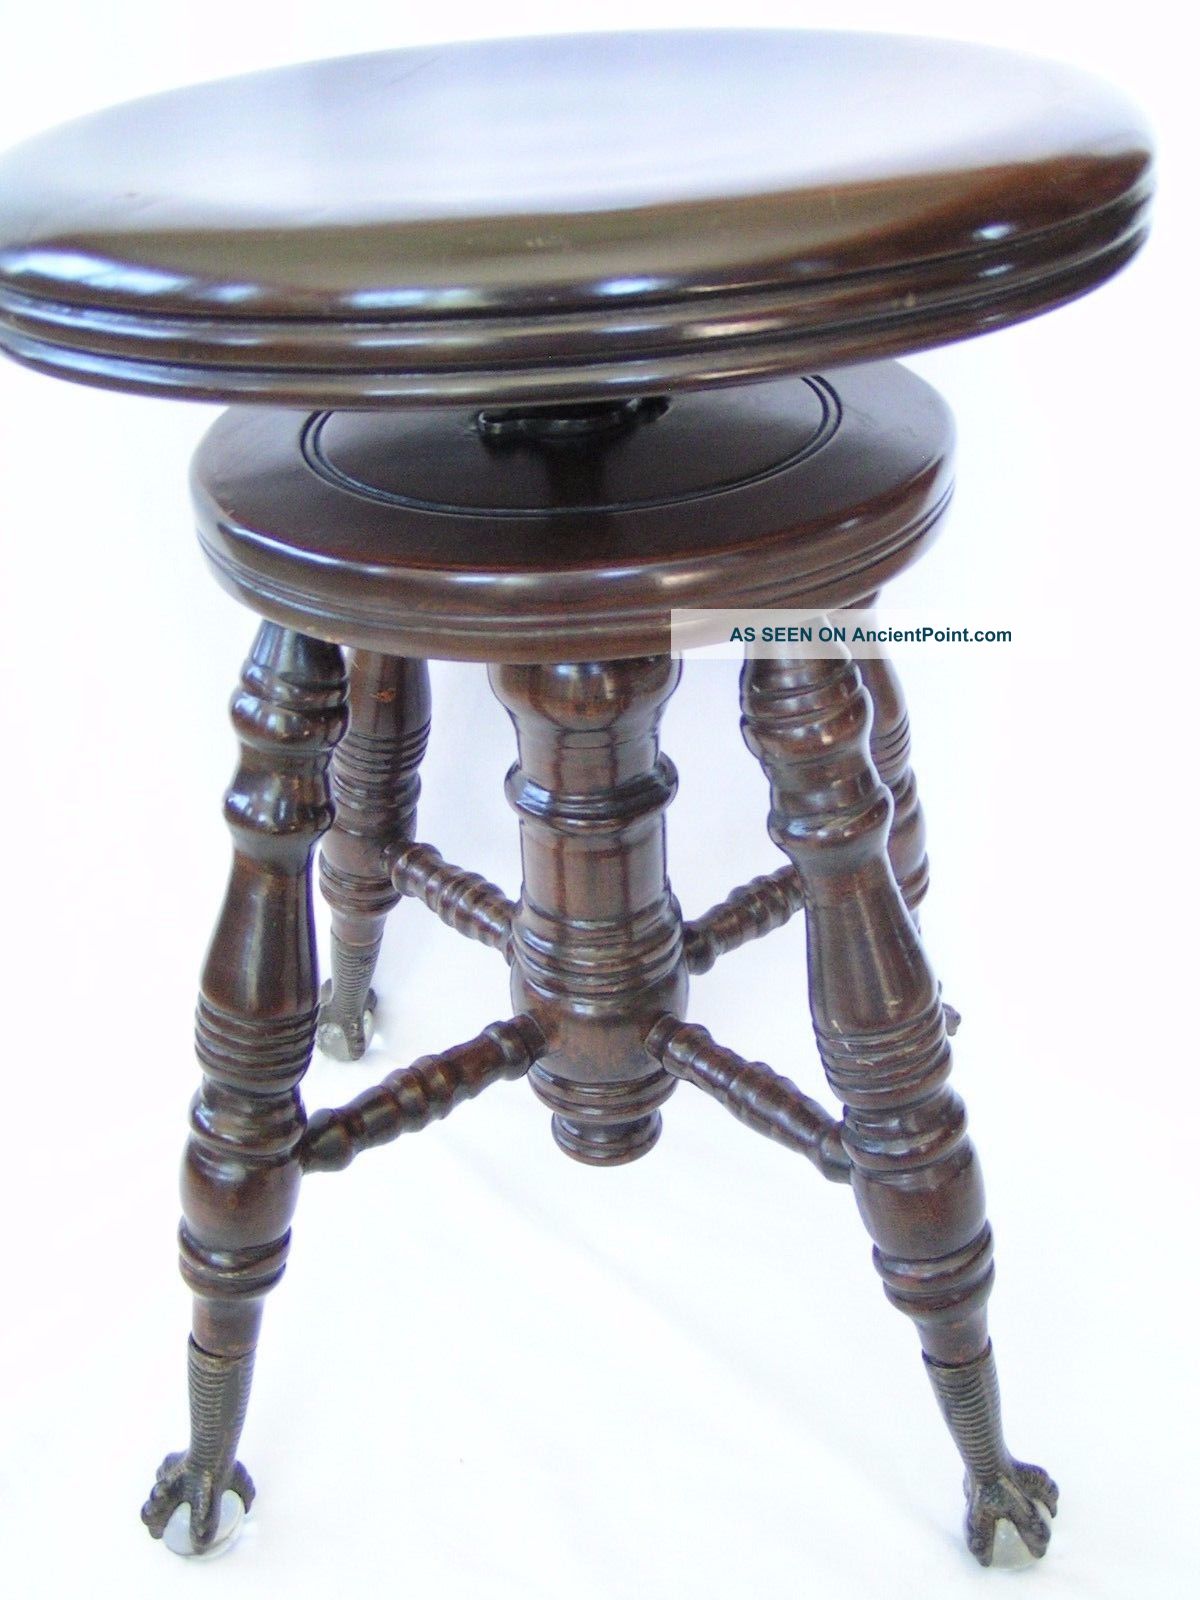 Antique Charles Parker Adjustable Piano Stool Meriden Ct W/eagle Claws 1800-1899 photo